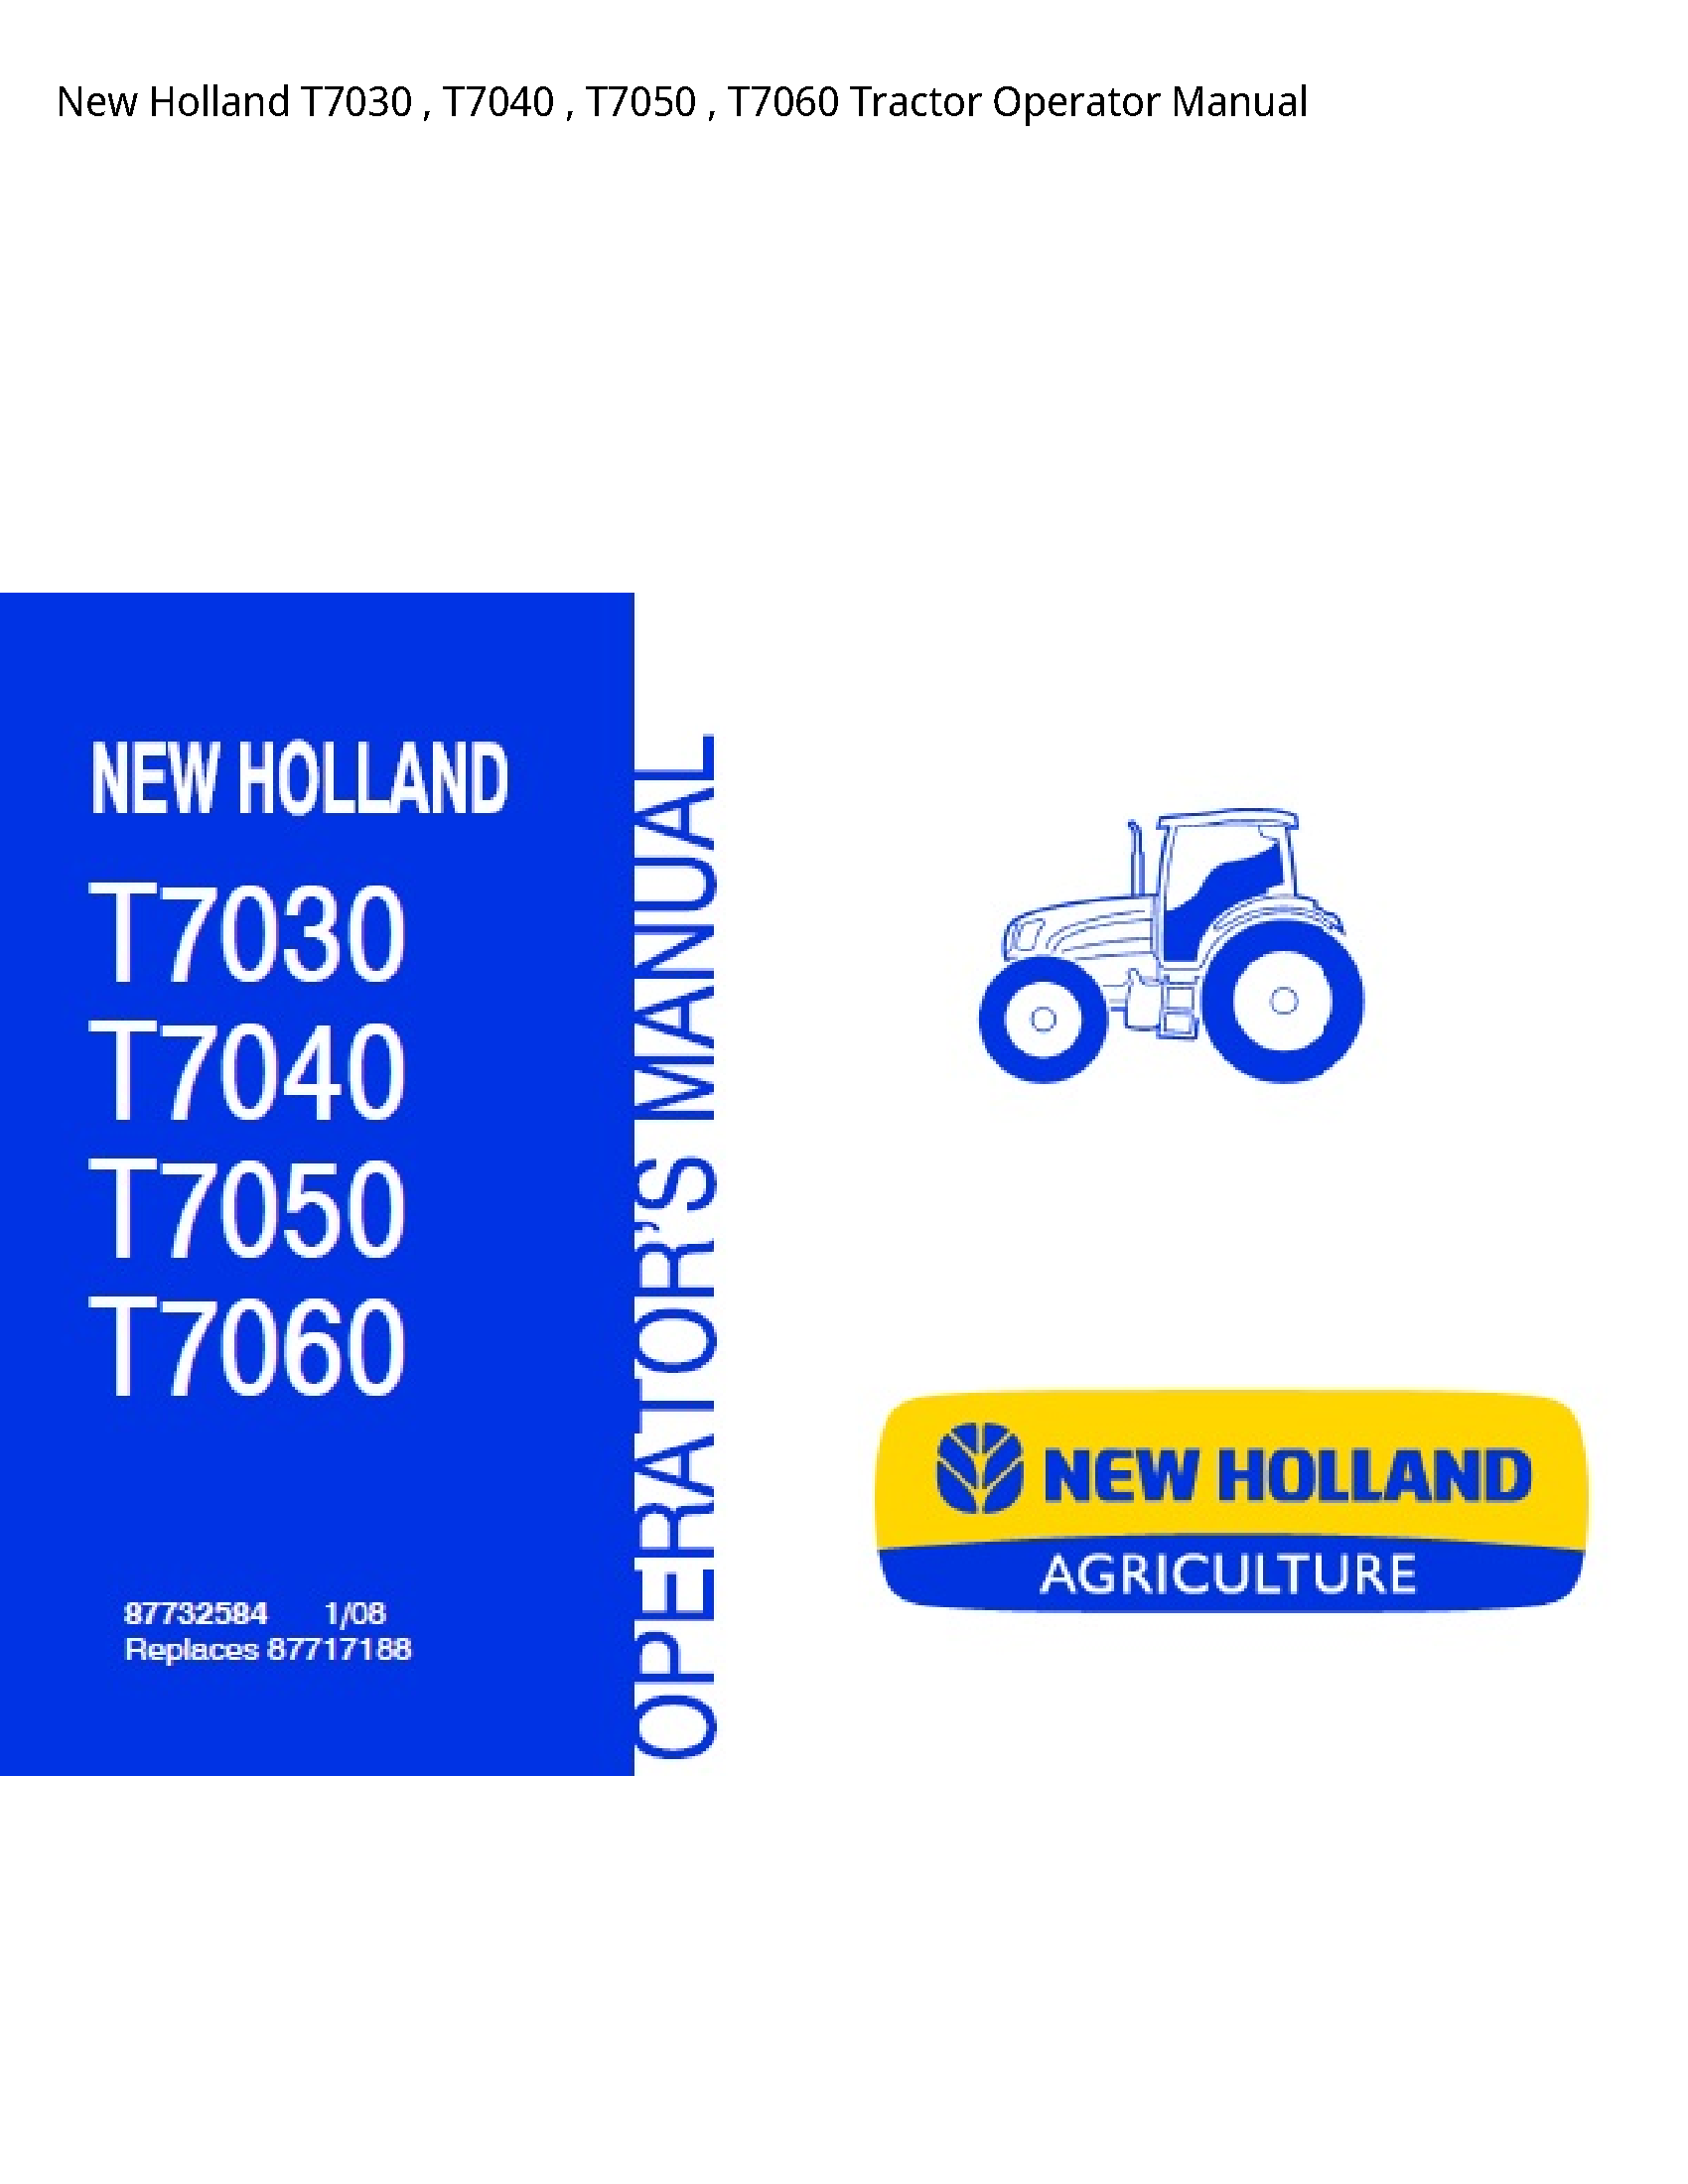 New Holland T7030 Tractor Operator manual